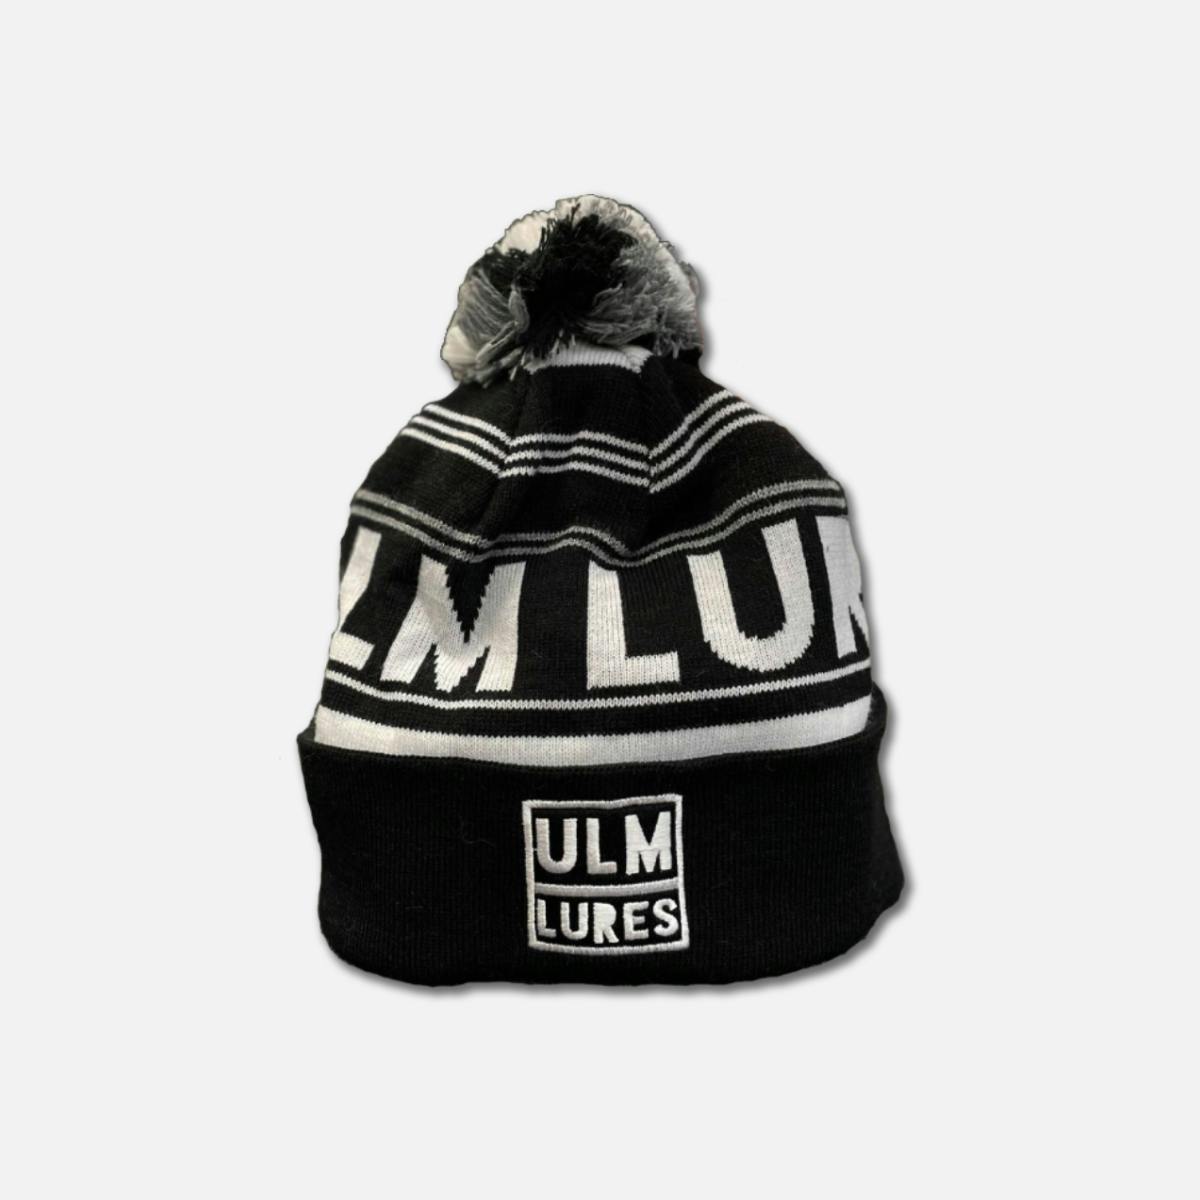 Ulm Lures Knitted Hat